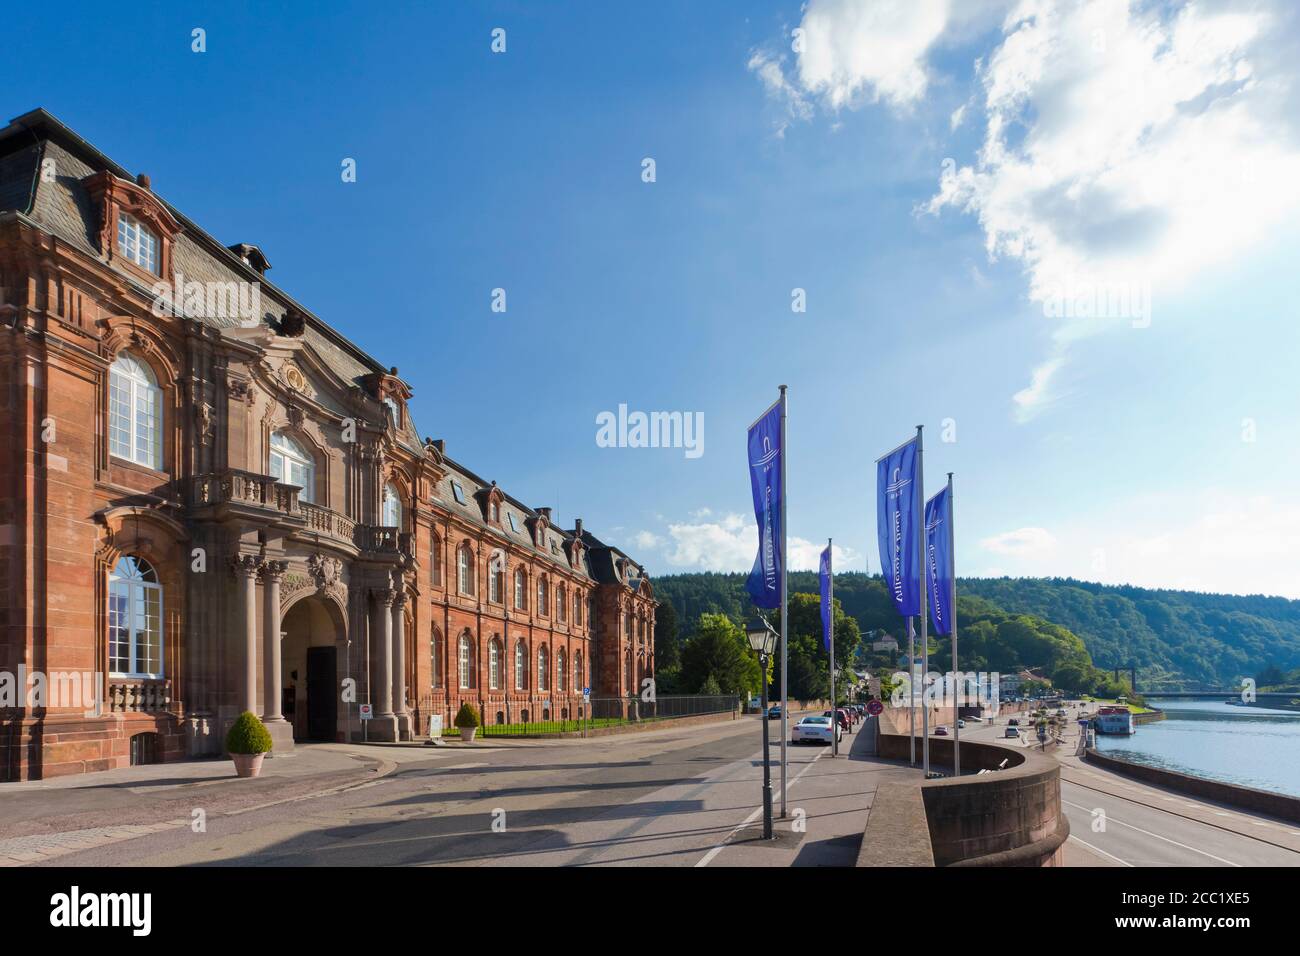 Germany, Saarland, View of old abbey with Villeroy and Boch at Saar River Stock Photo